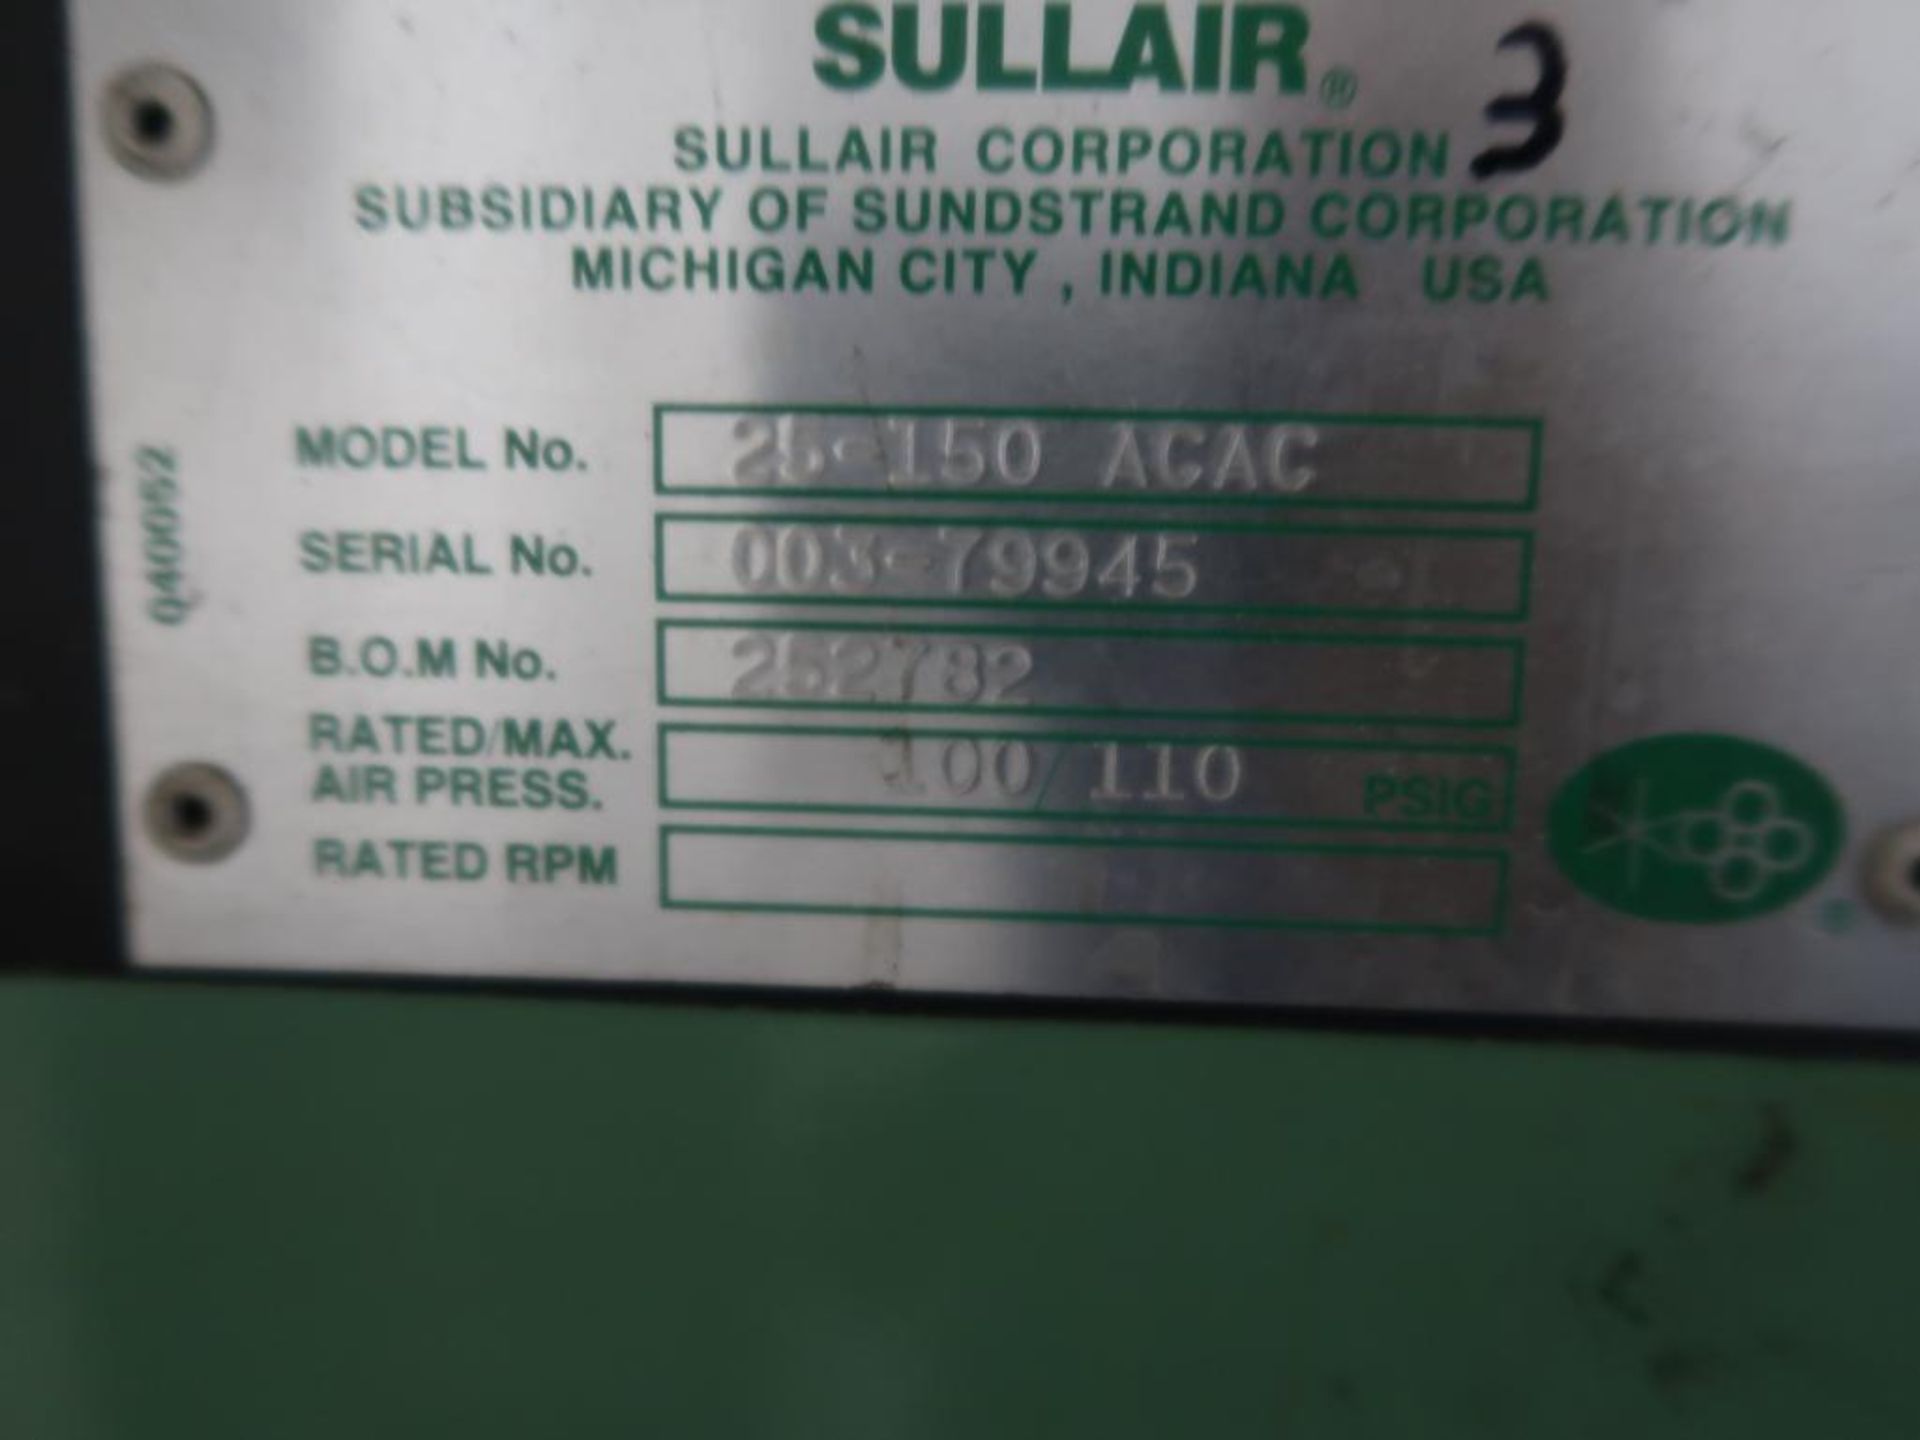 SULLAIR 150 HP Rotary Air Compressor Model 25-150 ACAC, S/N 003-79945 (#0391) - Image 3 of 4